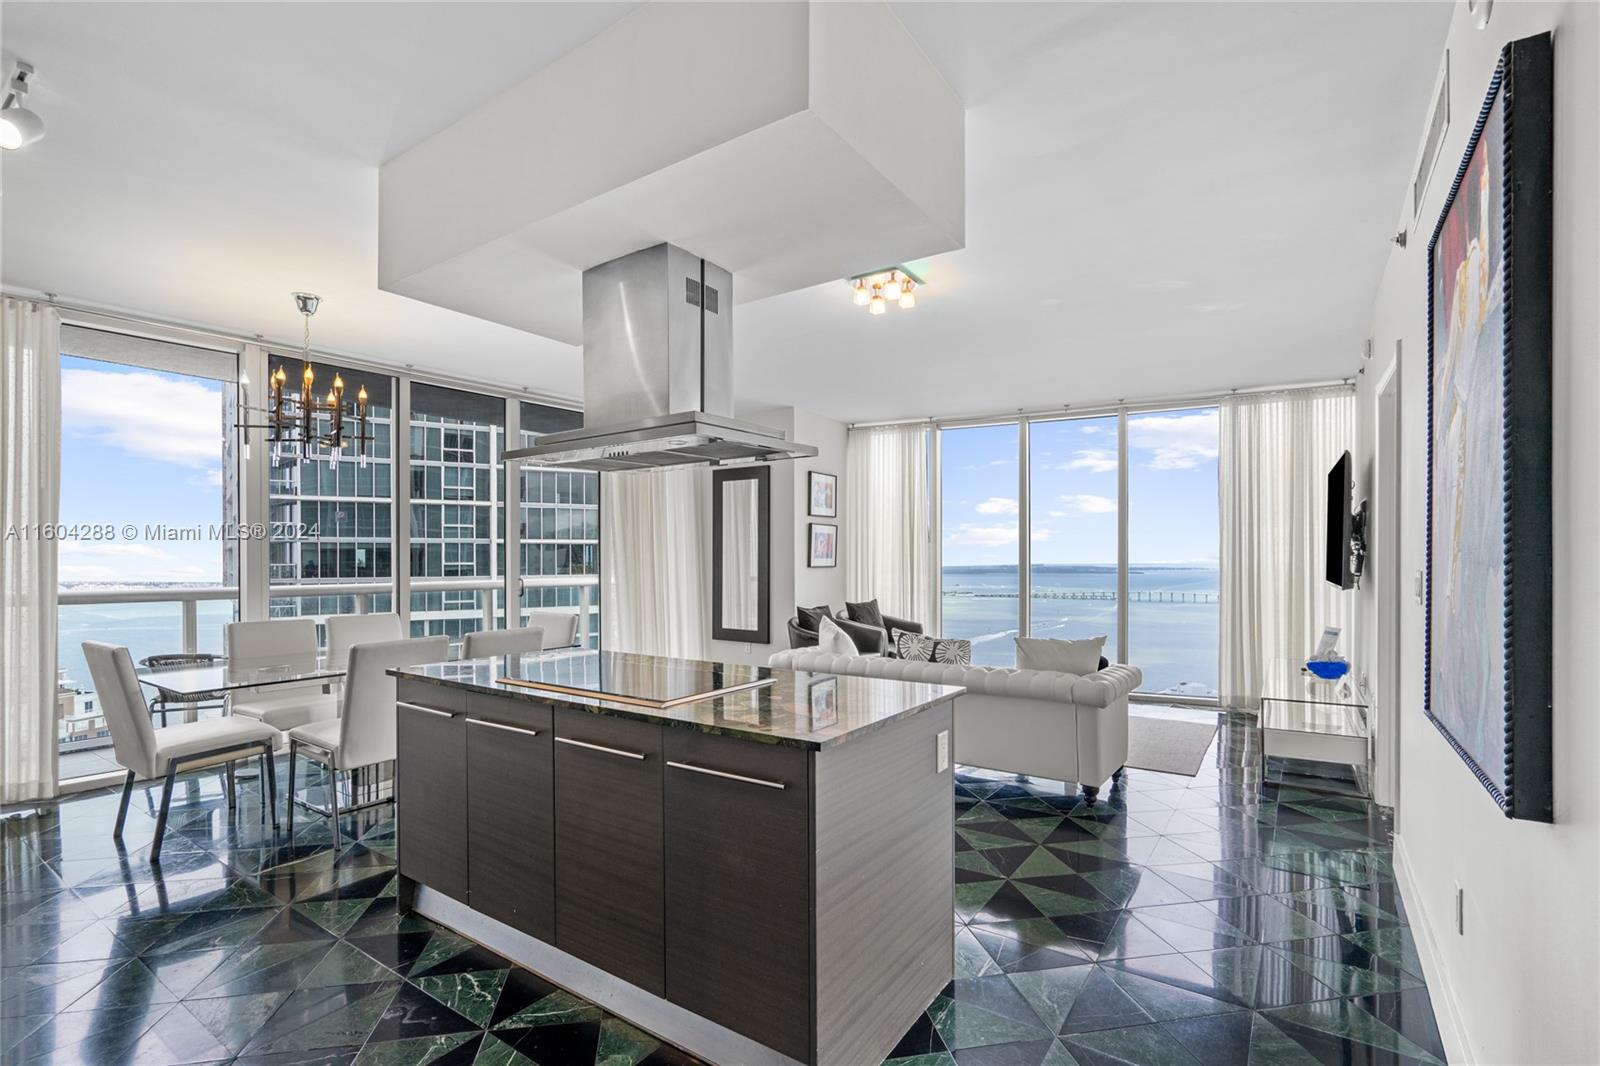 Discover luxury living in this stunning corner unit at W ICON TOWER, offering 2 Bed /2-baths with breathtaking views of the Bay, Ocean, River and City. Approved for short-term rentals, including Airbnb, this residence is perfect for investors seeking prime real estate. Designed by the famous Kelly Wearstler, this unit in Icon Brickell building 3 features premium amenities and stylish interiors. The property includes top of the line Subzero and Wolf appliances an owner's closet and comes fully furnished, providing rental flexibility when not in use. Located near Brickell City Center, you'll have access to top dining and shopping destinations like Cipriani and Cantina la 20. This unit epitomizes luxury and represents the pinnacle of Brickell living.